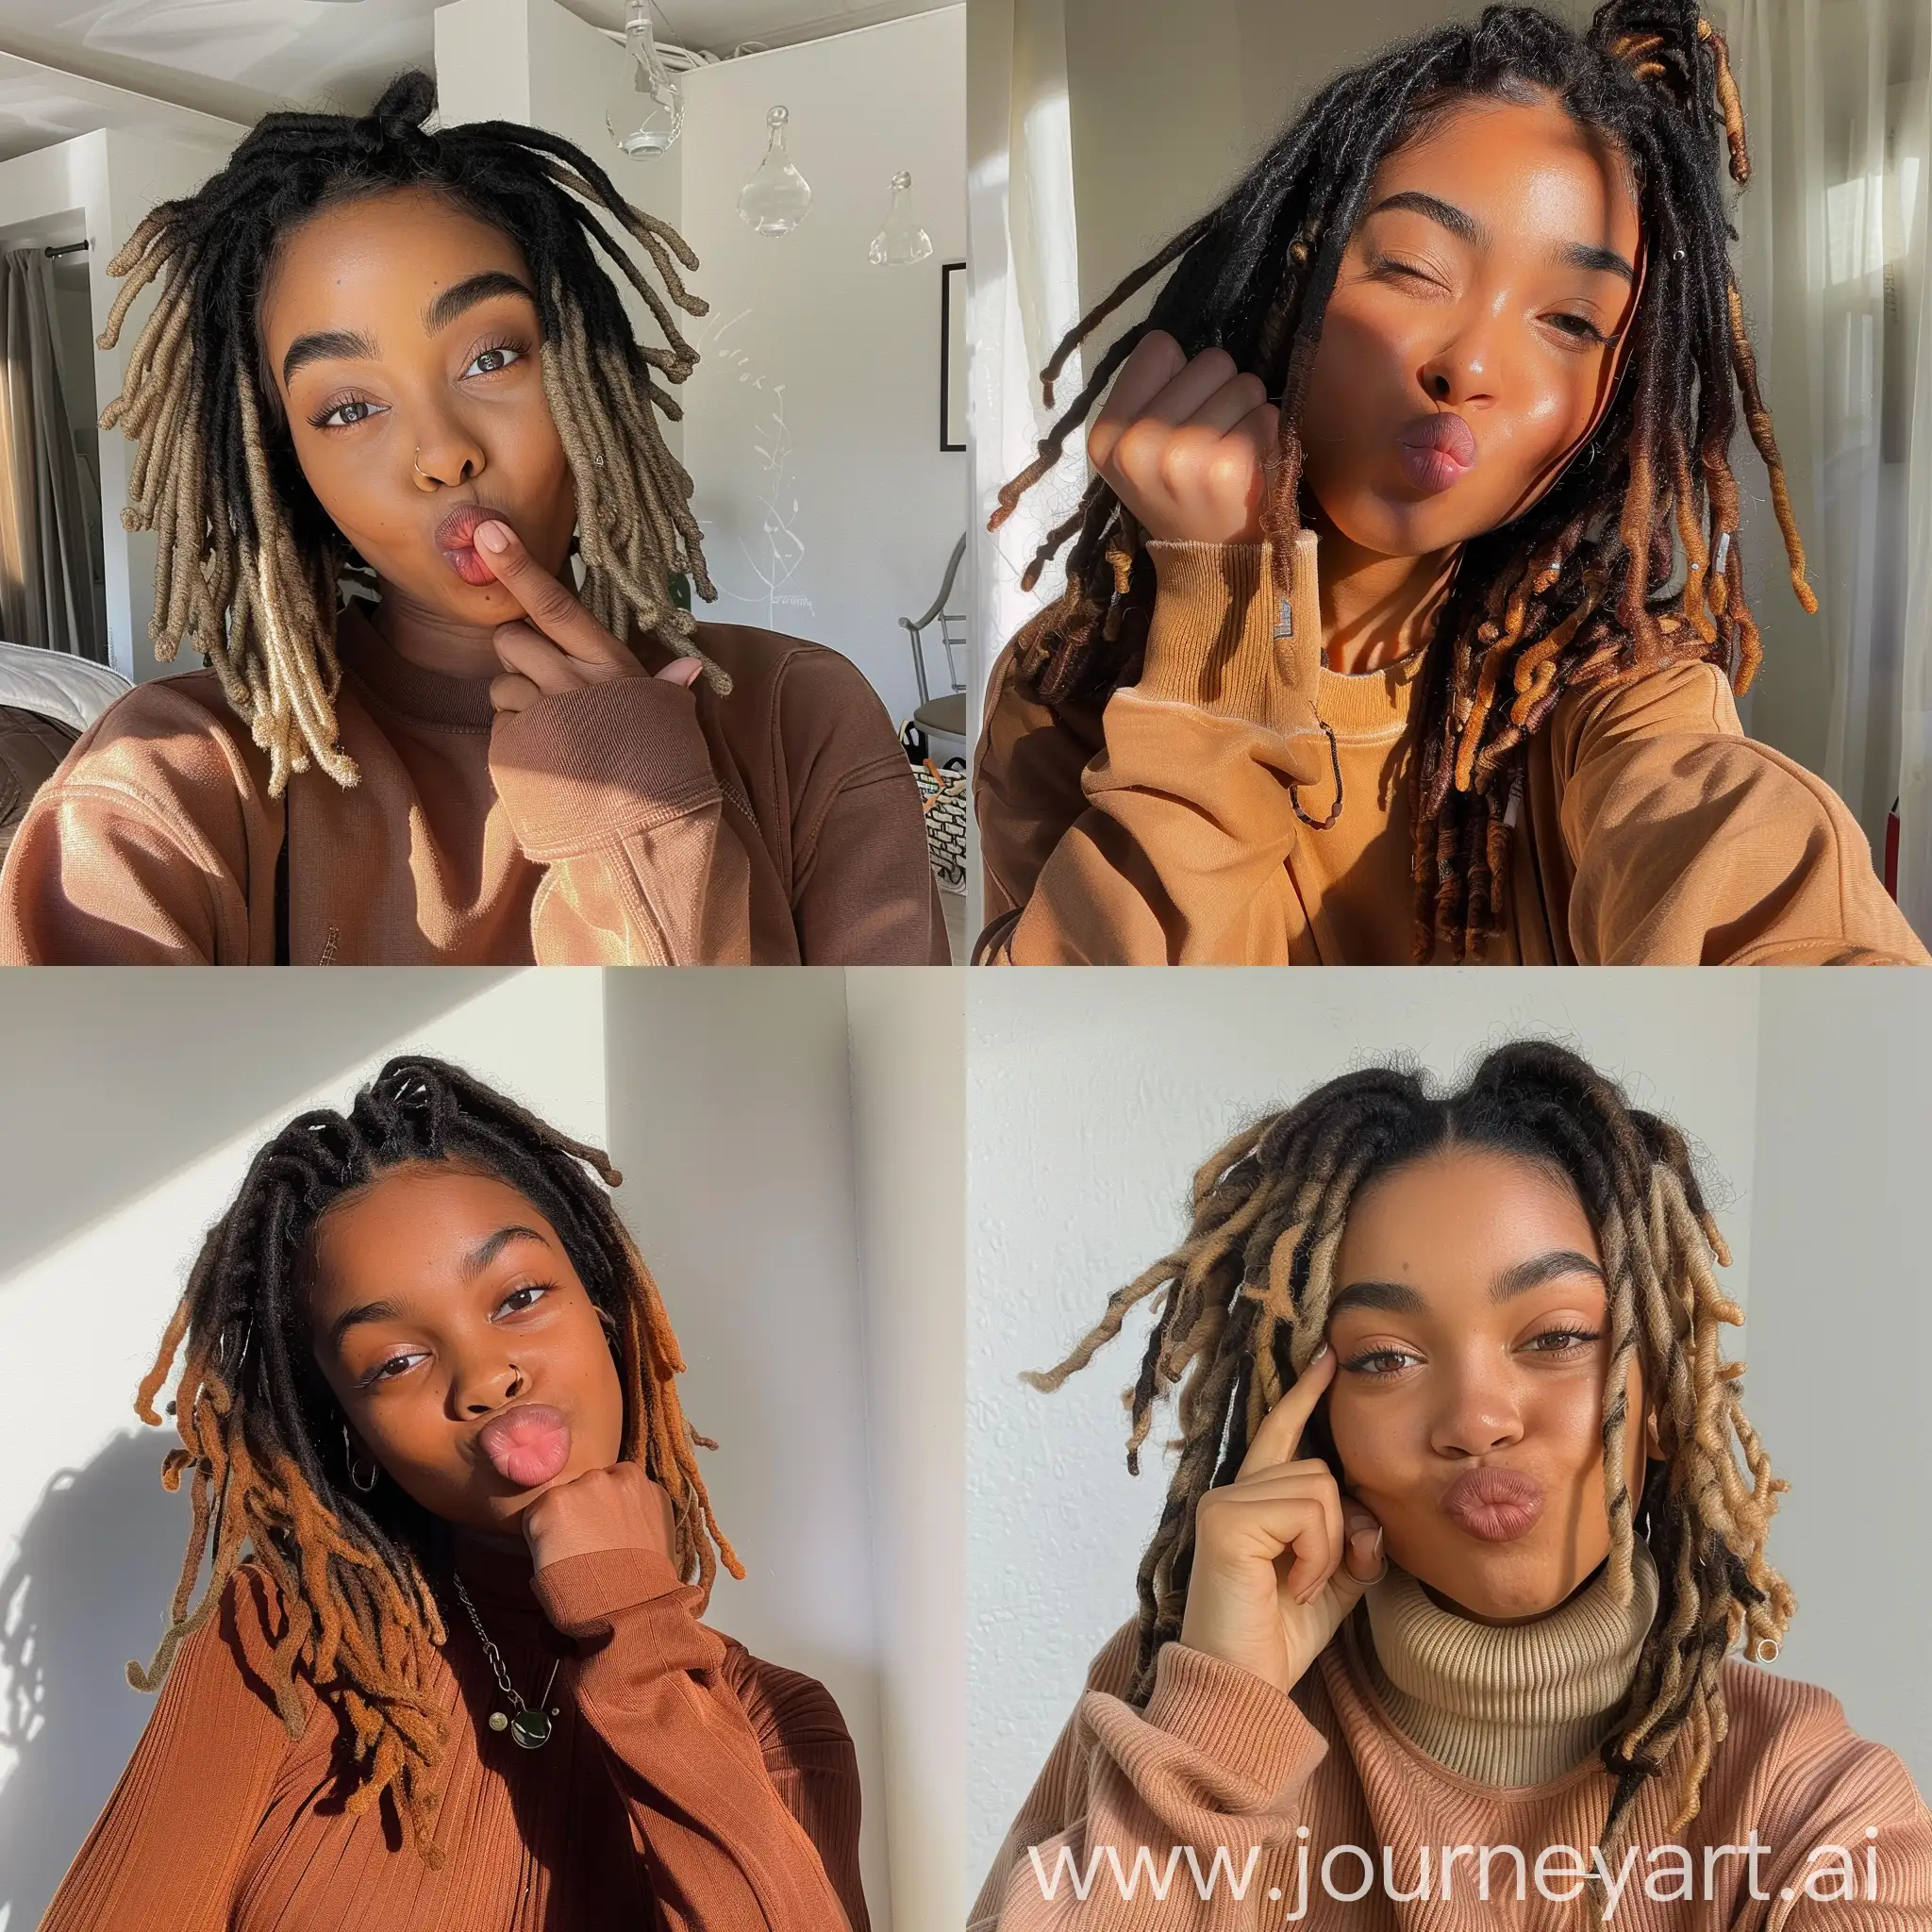 Aesthetic instagram selfie of a black teenage influencer with ombre dreadlocks, making silly face, soft brown clothing color tones--ar 9:16